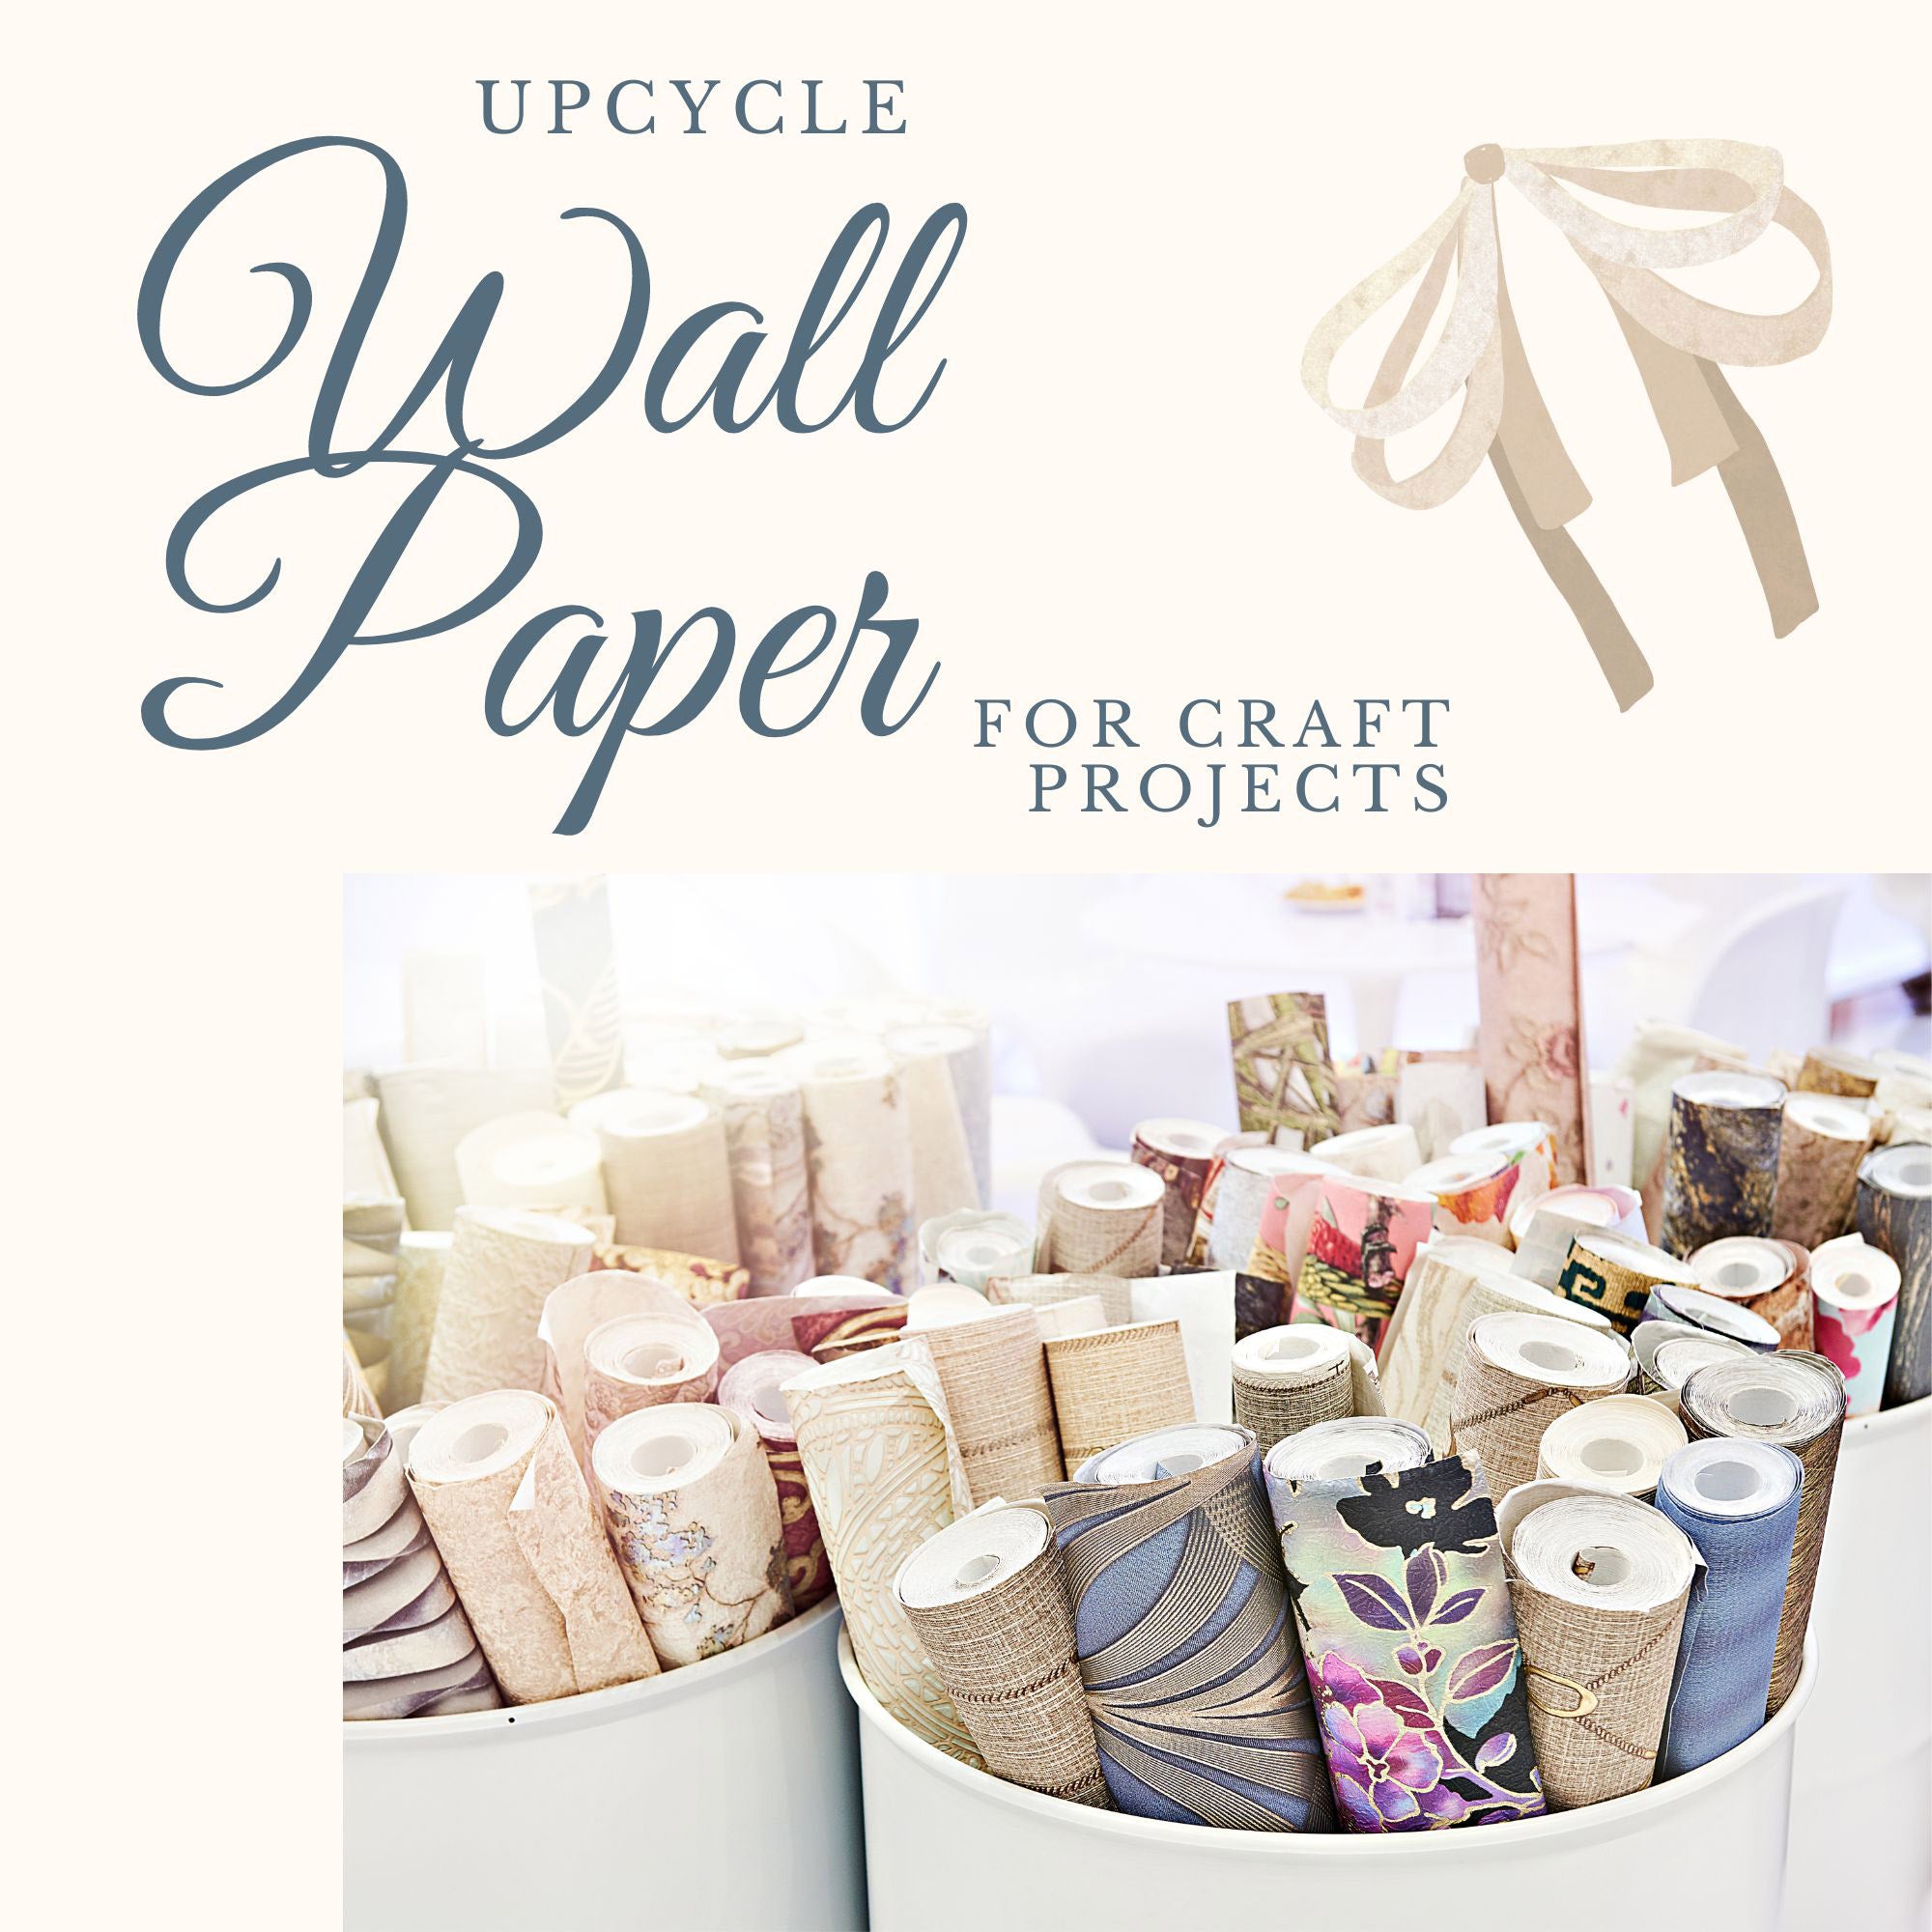 Up Cycled Wall Paper Craft Projects